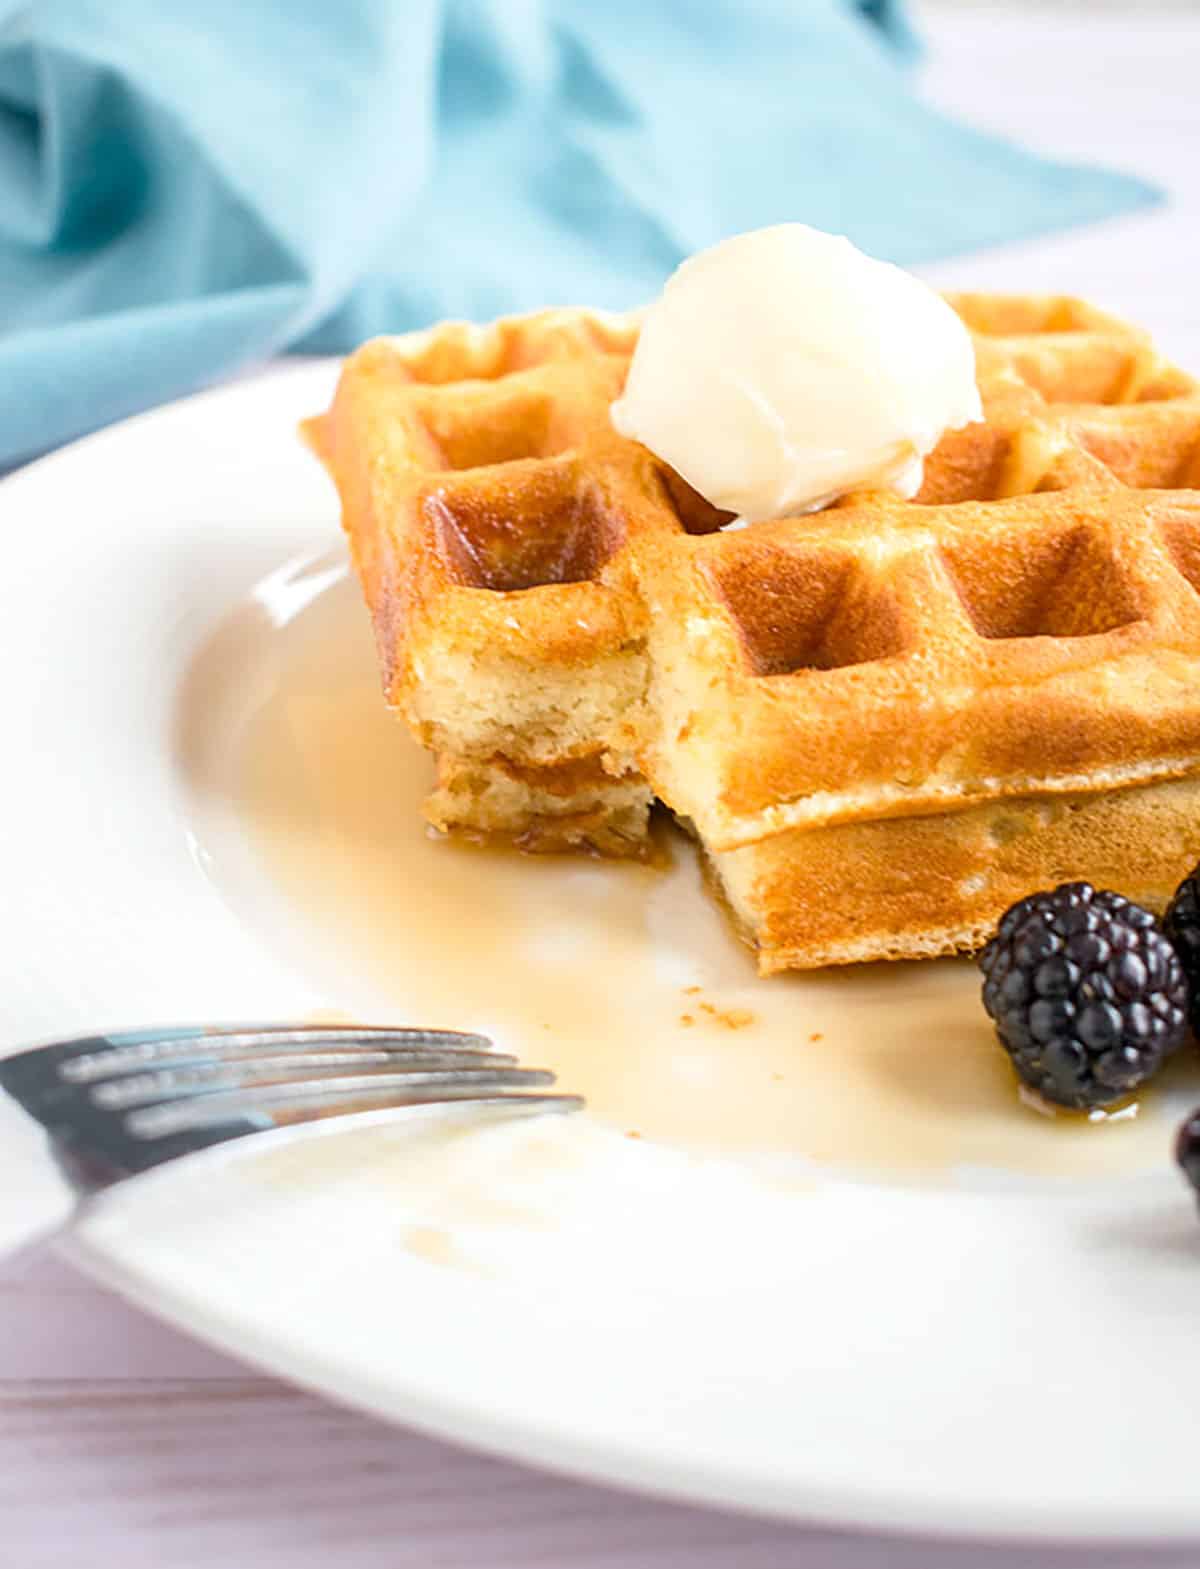 prepared waffle on a plate with butter, syrup and blackberries